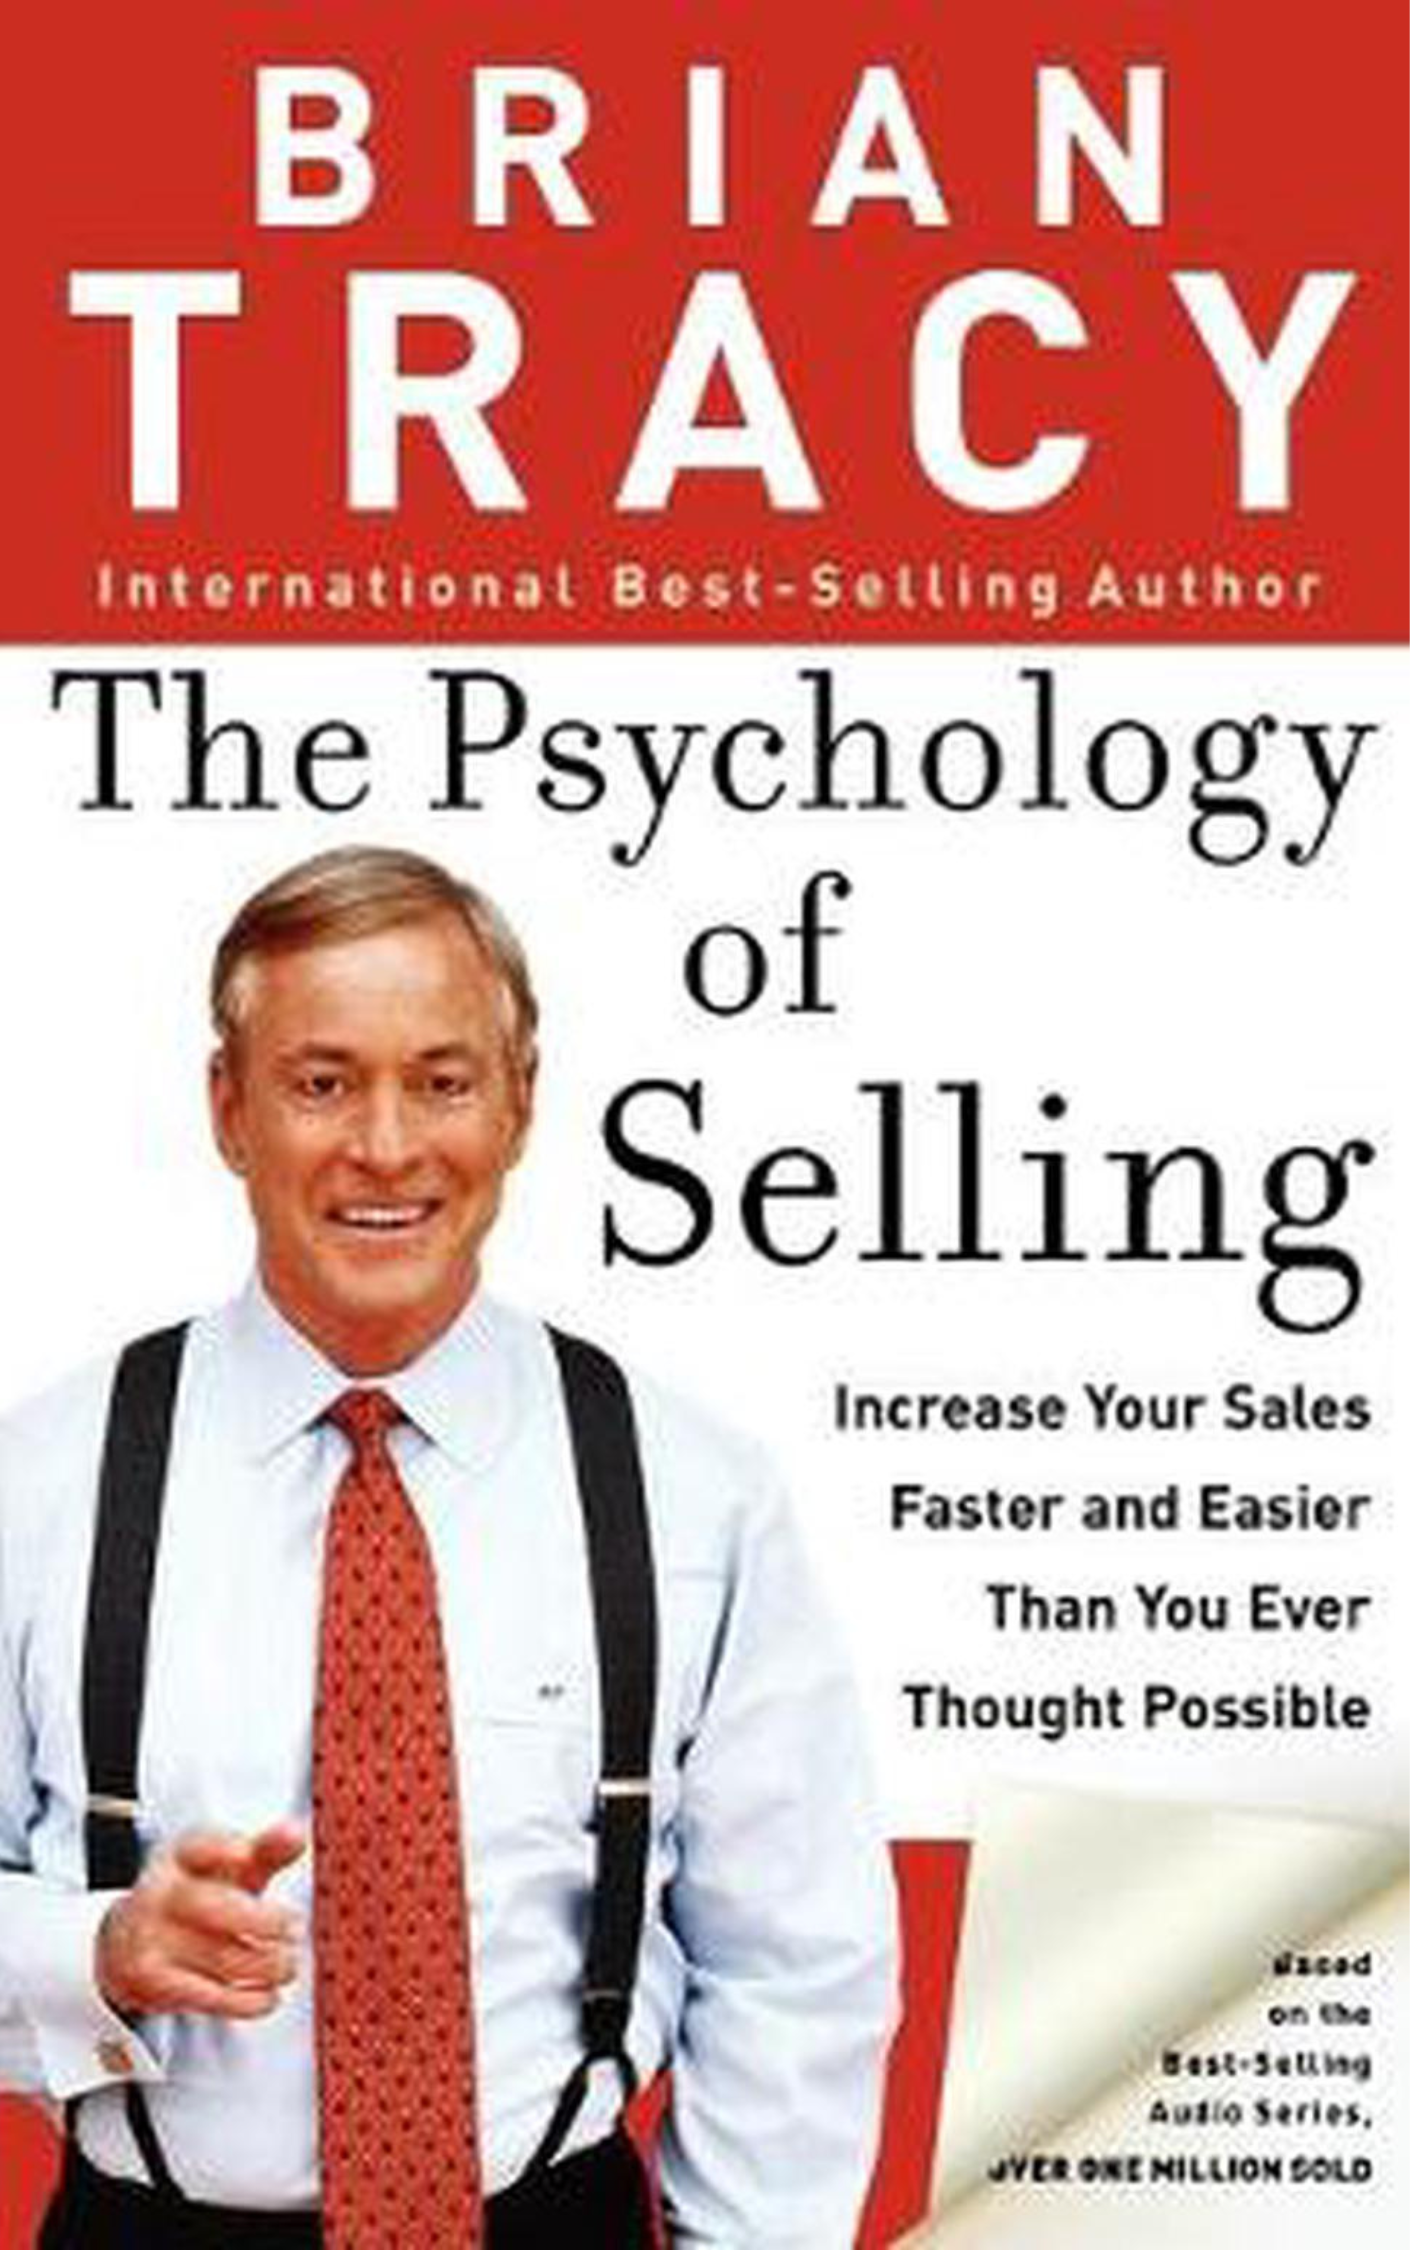 THE PSYCHOLOGY OF SELLING by BRIAN TRACY